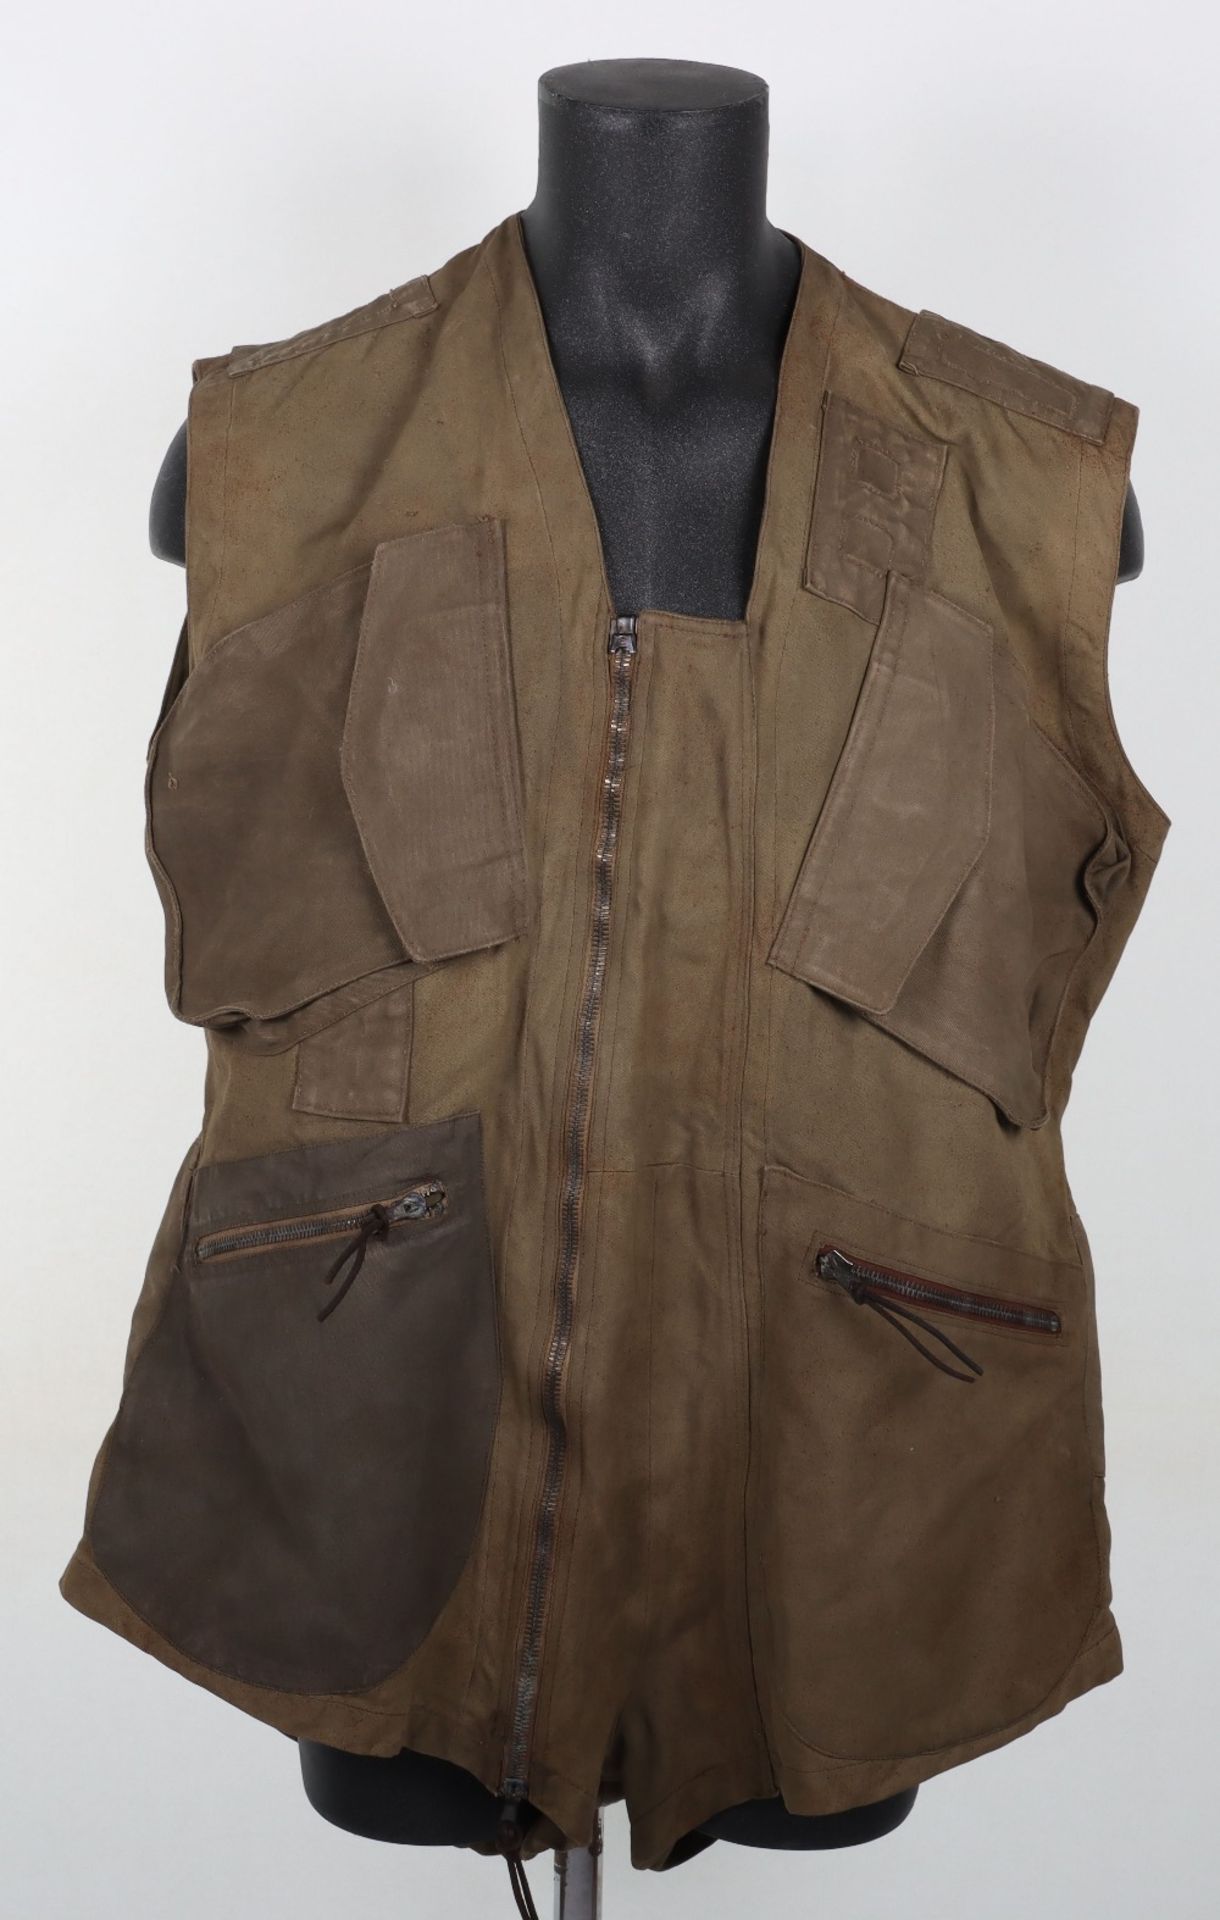 Rare Modified Irvin Jump Jacket Smock Used by the Polish Airborne Forces